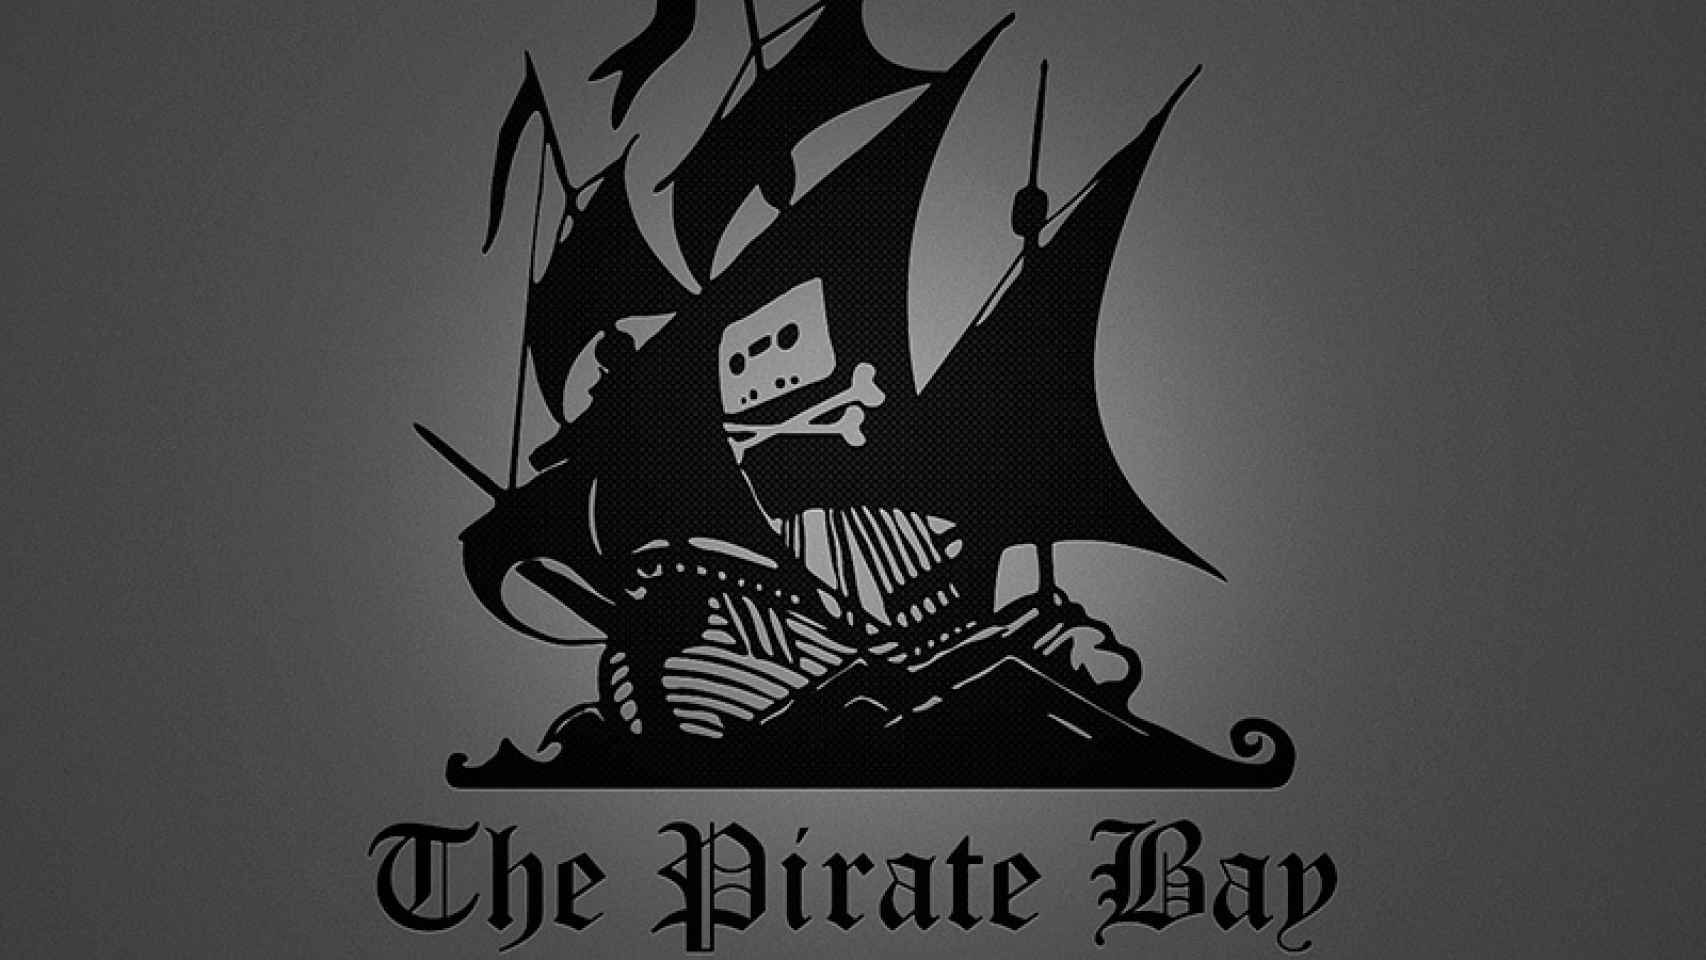 pirate-bay-torrent-time